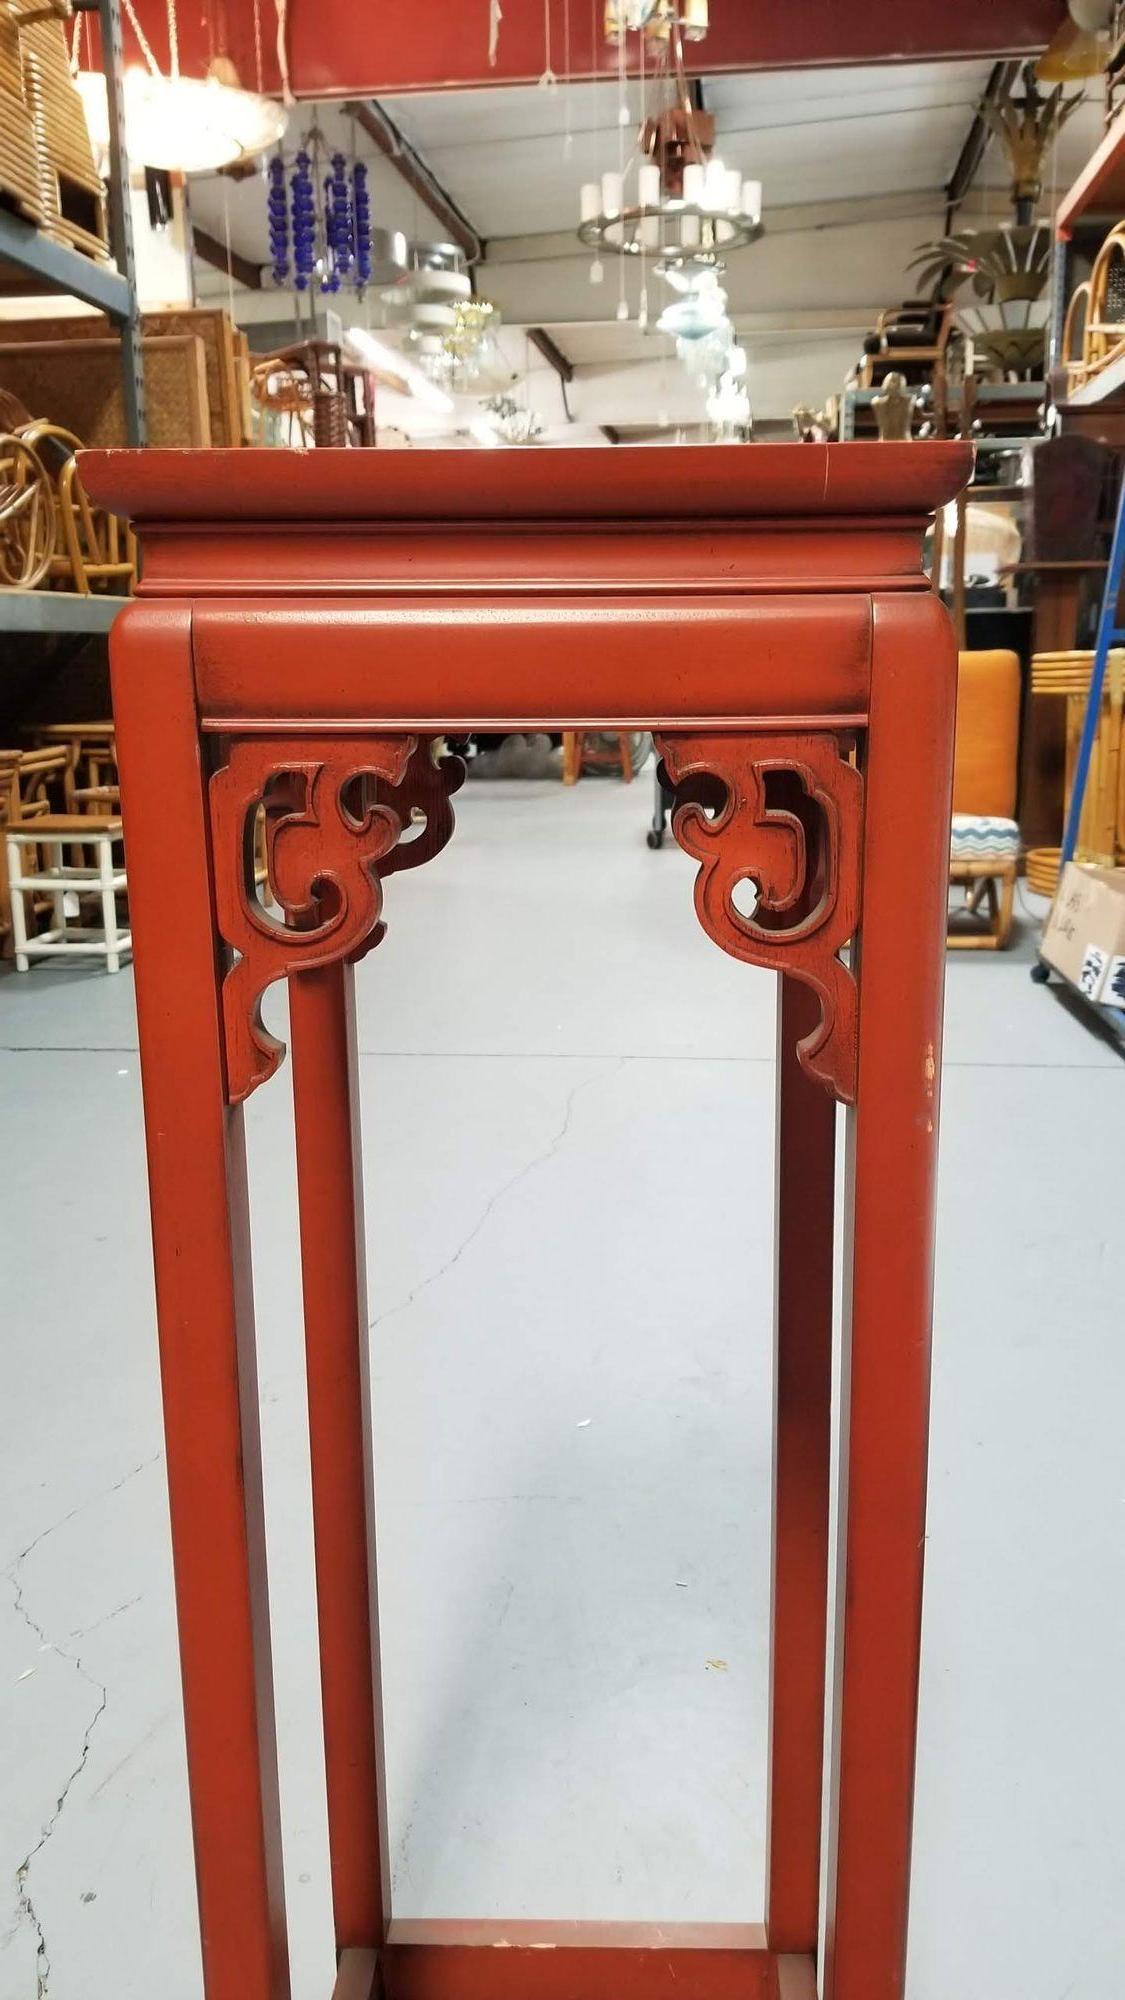 Red painted wood pedestal table with ornate details in the style of the Chinese Ming and Qing dynasty fits right in in any James mont setting.



Ming and Qing dynasty style furniture refers to the traditional furniture produced in China during